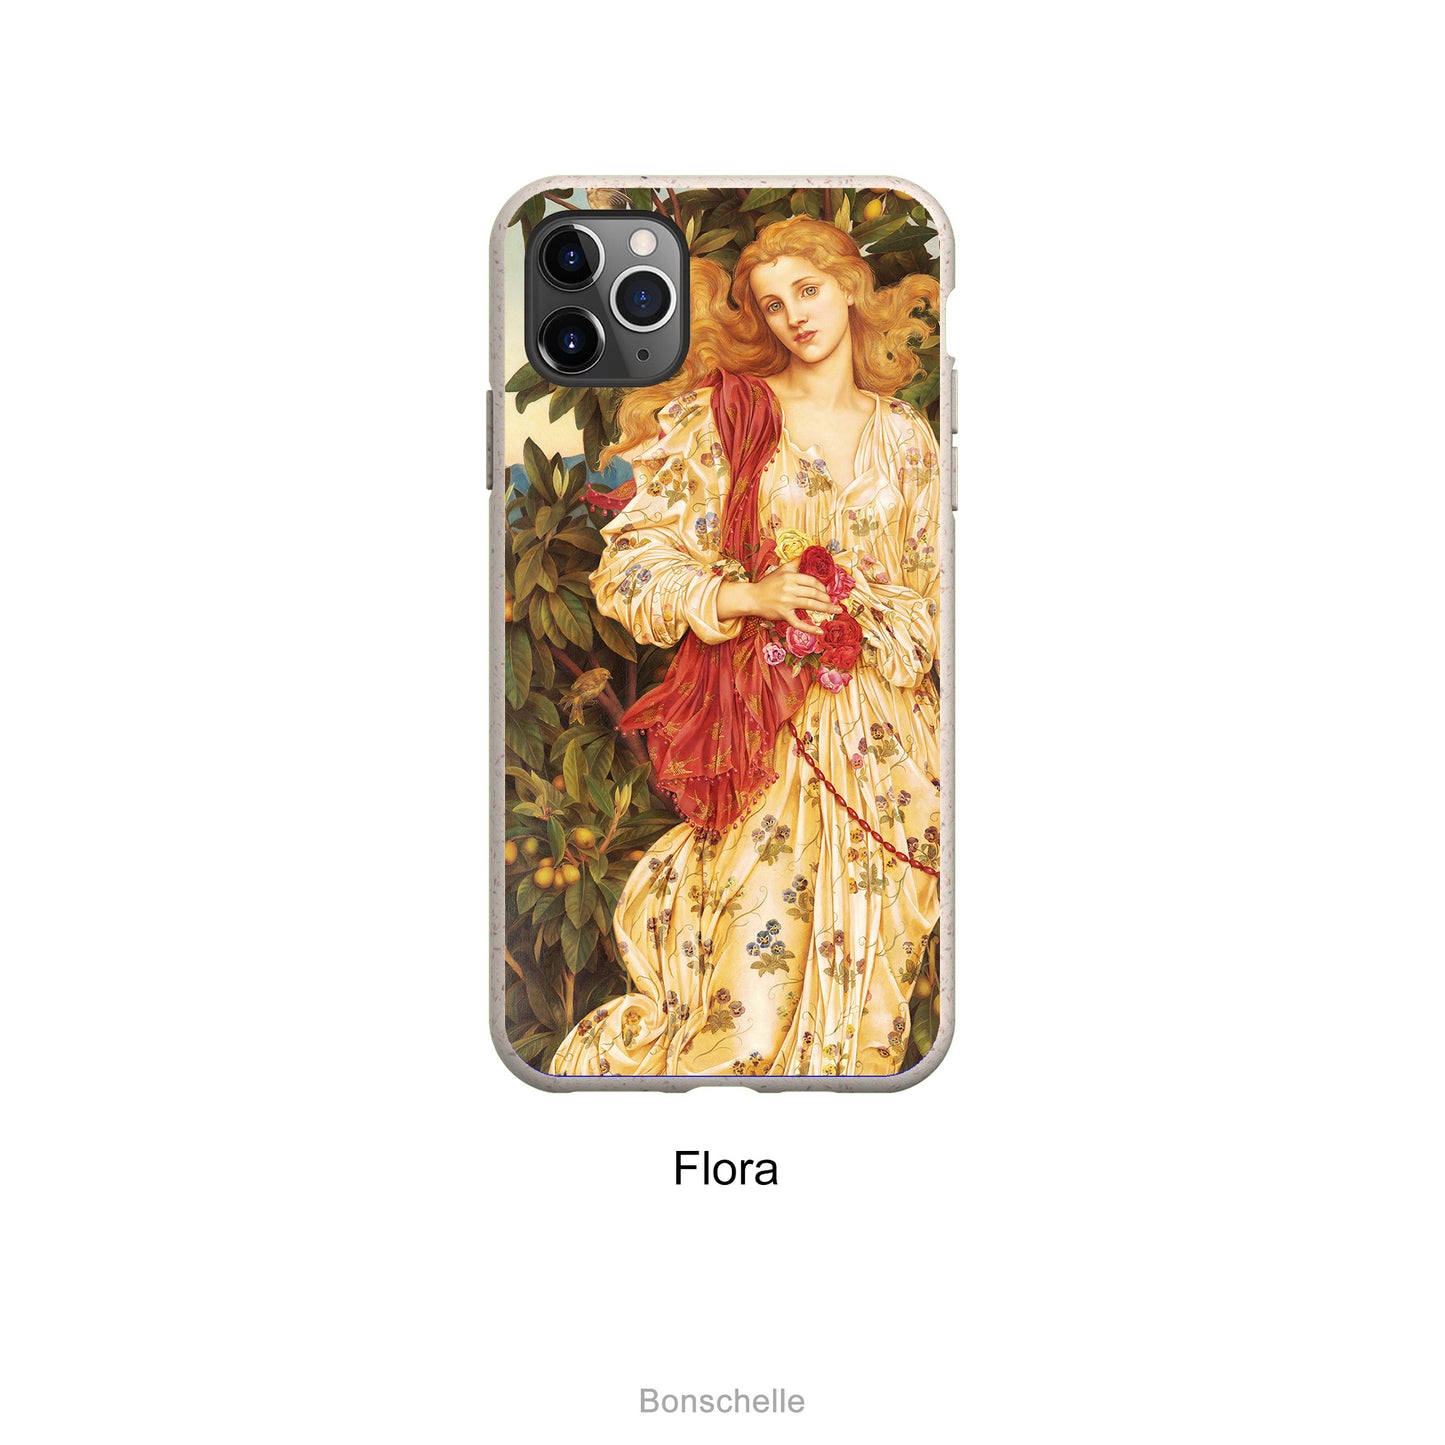 Evelyn De Morgan Pre-Raphaelite Painting 'Flora' Eco Phone Cases for Samsung and iPhone